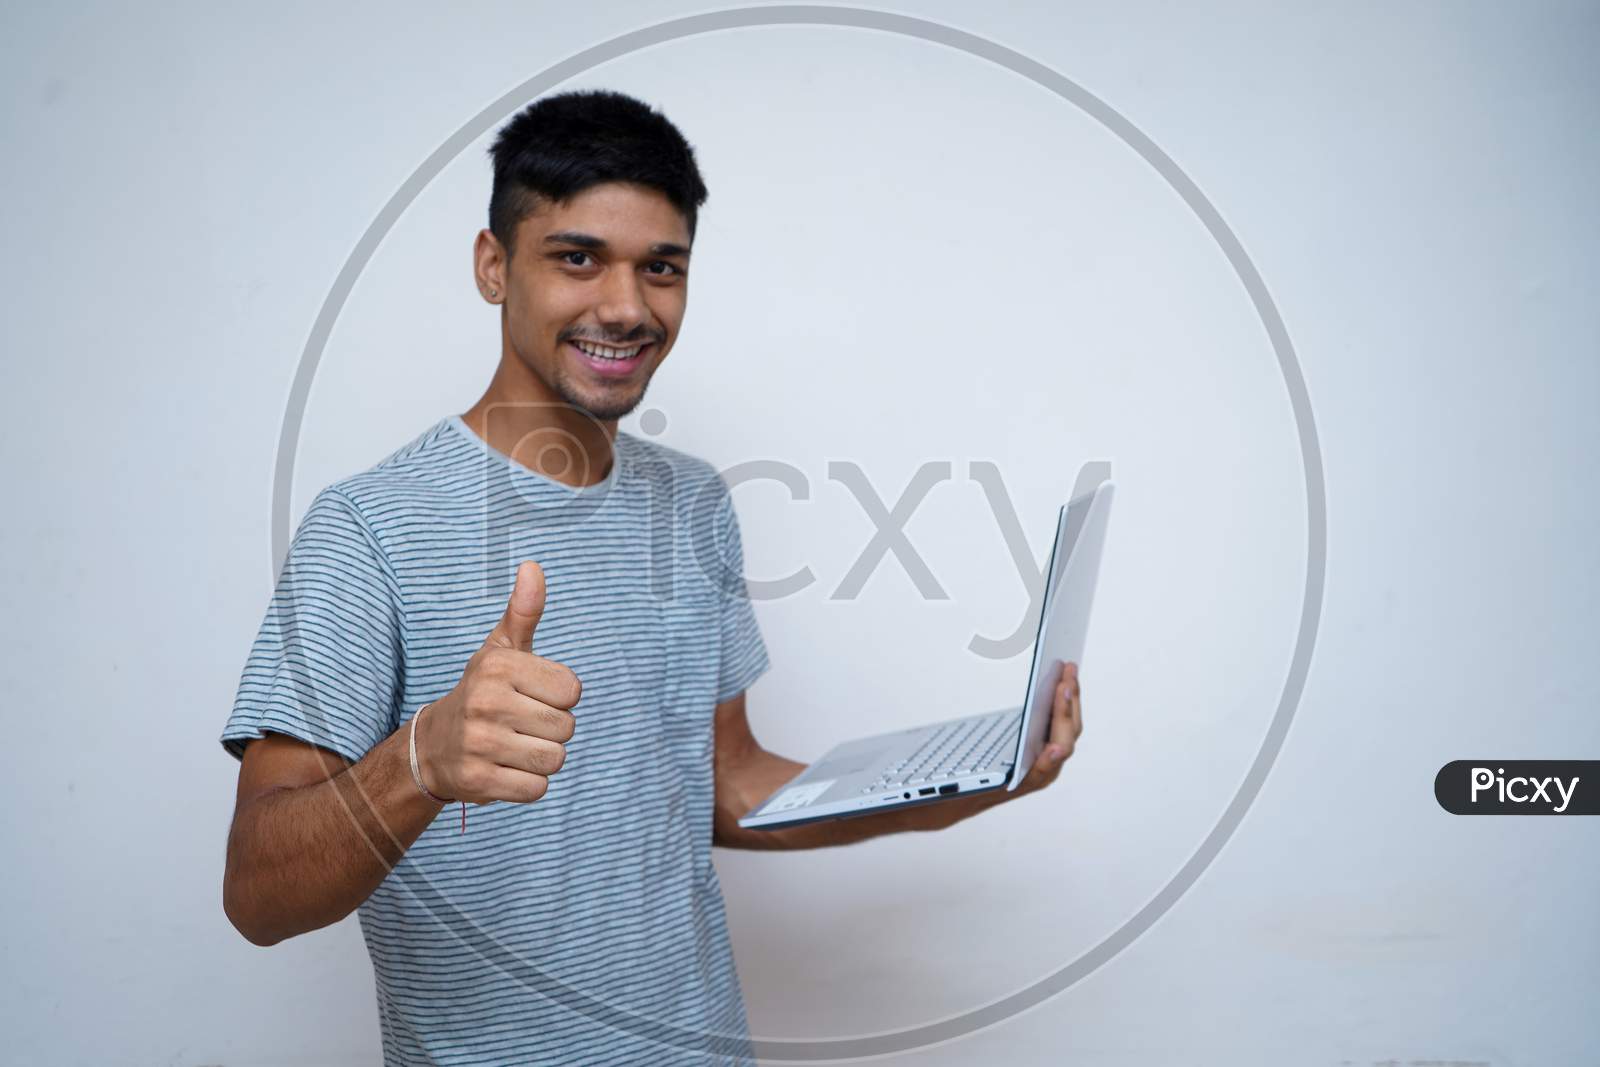 Young Indian Handsome Boy Showing Thumbs Up And Smiling While Looking Into The Camera, Holding Laptop In His Other Hand.